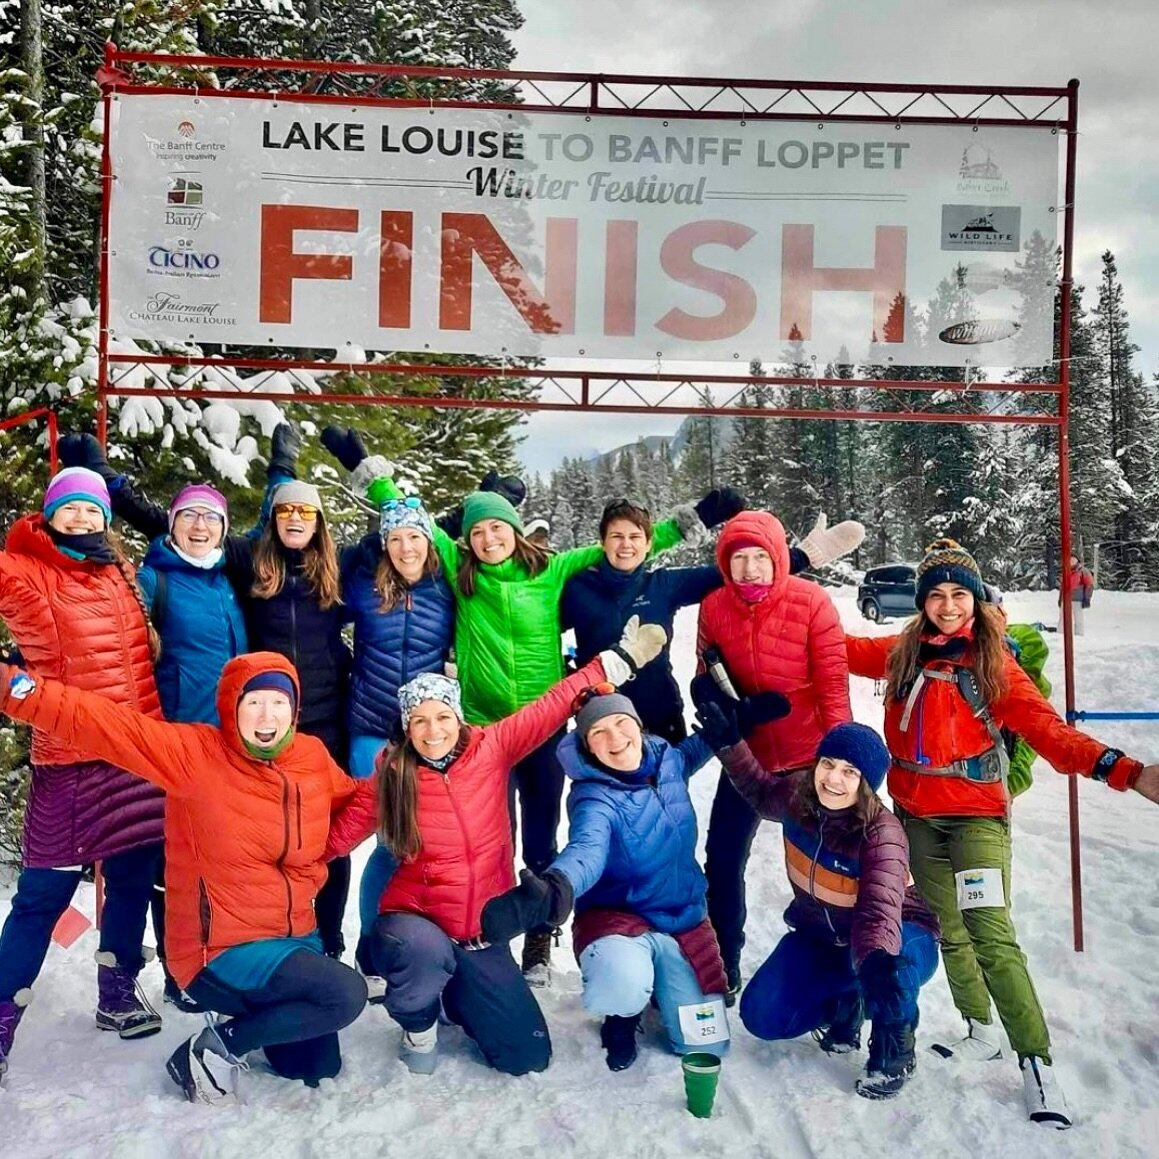 A huge cheer for these RadMums who took part in the Lake Louise to Banff loppet! It was a 43km stretch that could be completed solo or as a team. Although the course was spectacular, it sounds like the after party might&rsquo;ve been the best part 🤣